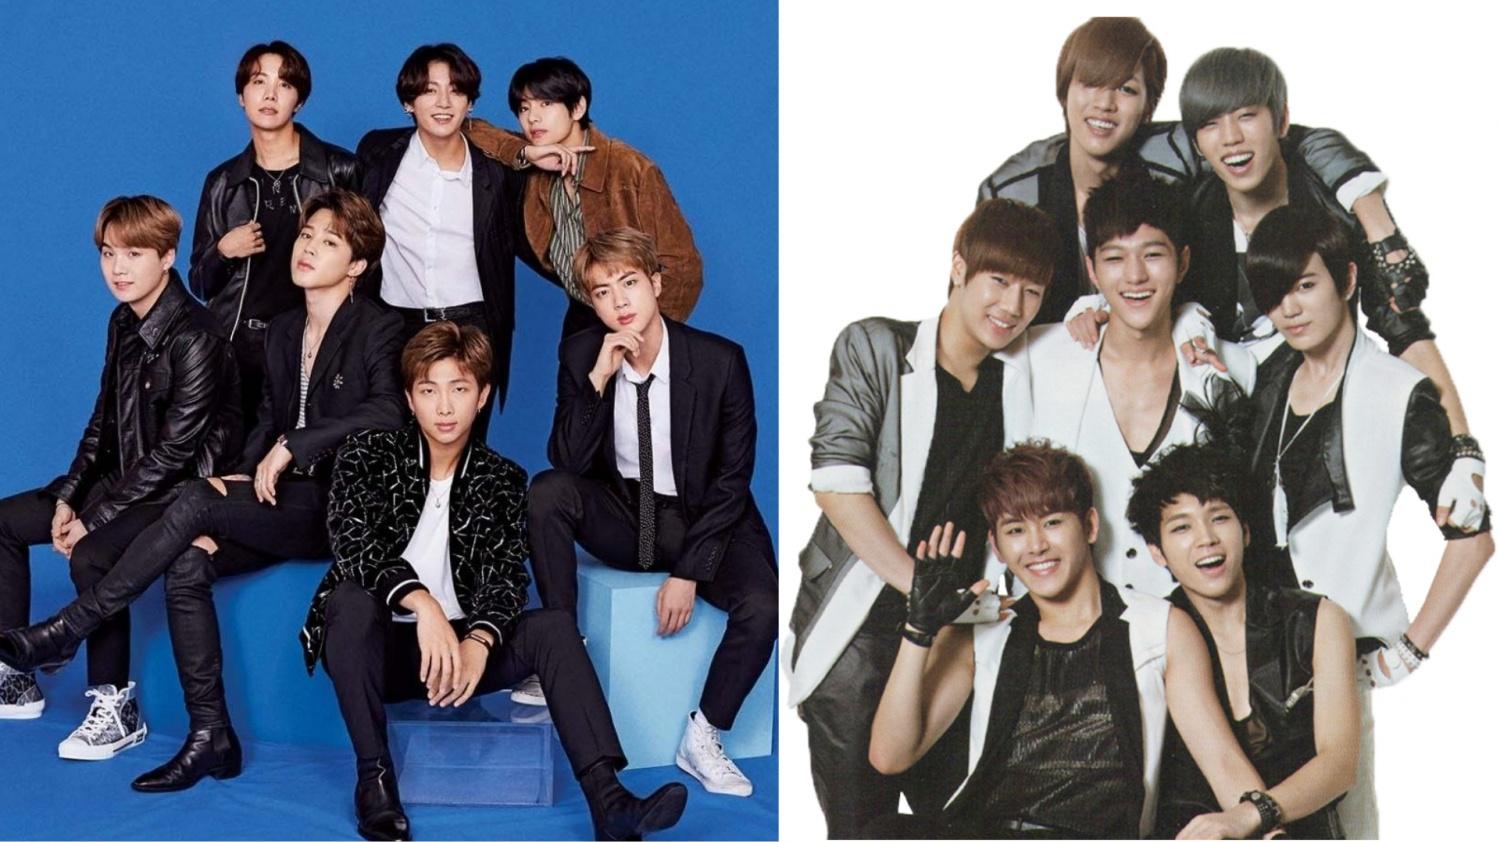 Here Are the 9 Greatest K pop Boy Band Songs of All Time According